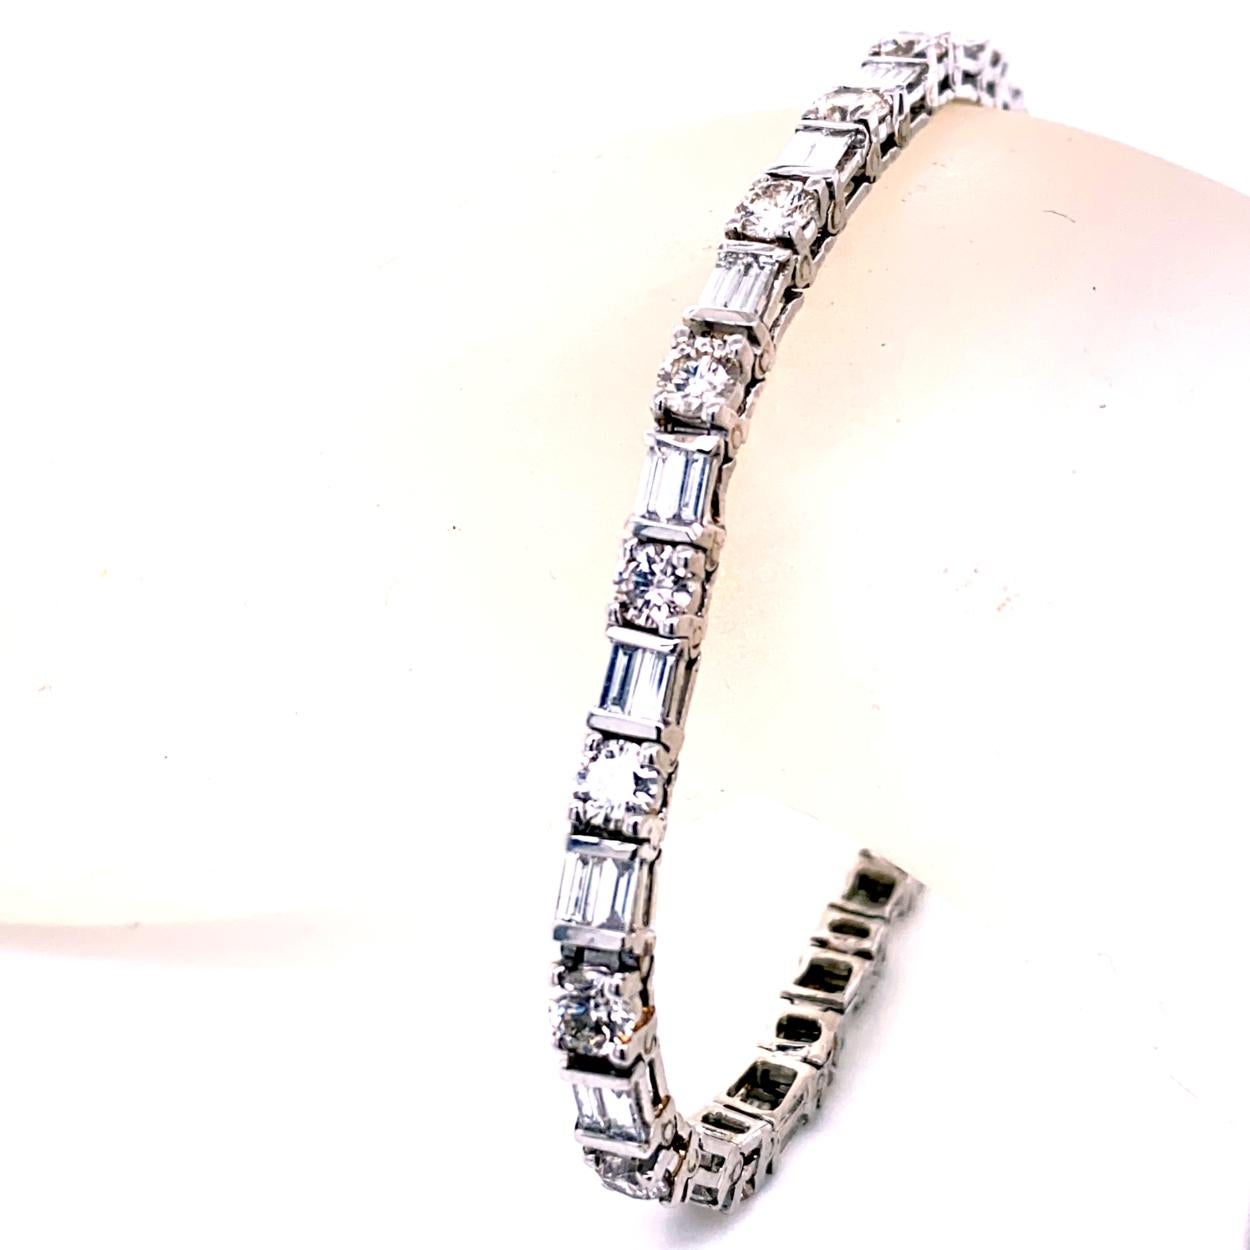 This beautiful Diamond Tennis Bracelet consists of 20 Links of alternating Round and Baguette diamonds set in platinum. The bracelet comes with a built-in hidden safety lock. 
Total Weight of diamonds: 9.91 Ct
Total Weight of bracelet: 20.20 gr